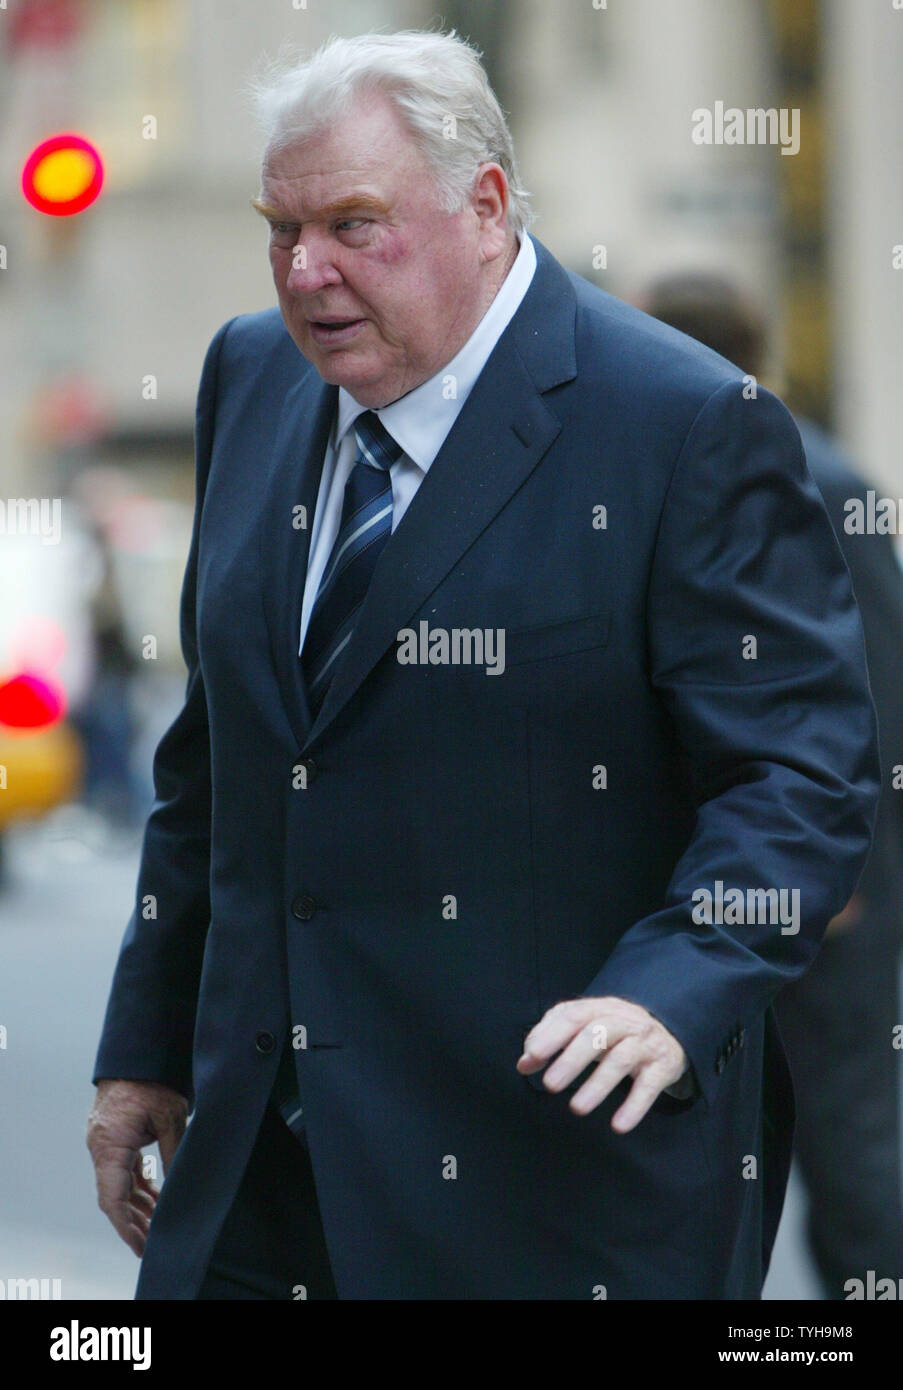 John Madden, former football coach and announcer, arrives to the funeral for  Wellington Mara, co-owner of the Giant's football team, at St. Patrick's Cathedral  at the conclusion of his funeral on October 28, 2005 in New York City. Mara, who succumbed to cancer at the age of 89, began as a ball boy when his father owned the New York team and later went on to become its owner. (UPI Photo/Monika Graff) Stock Photo